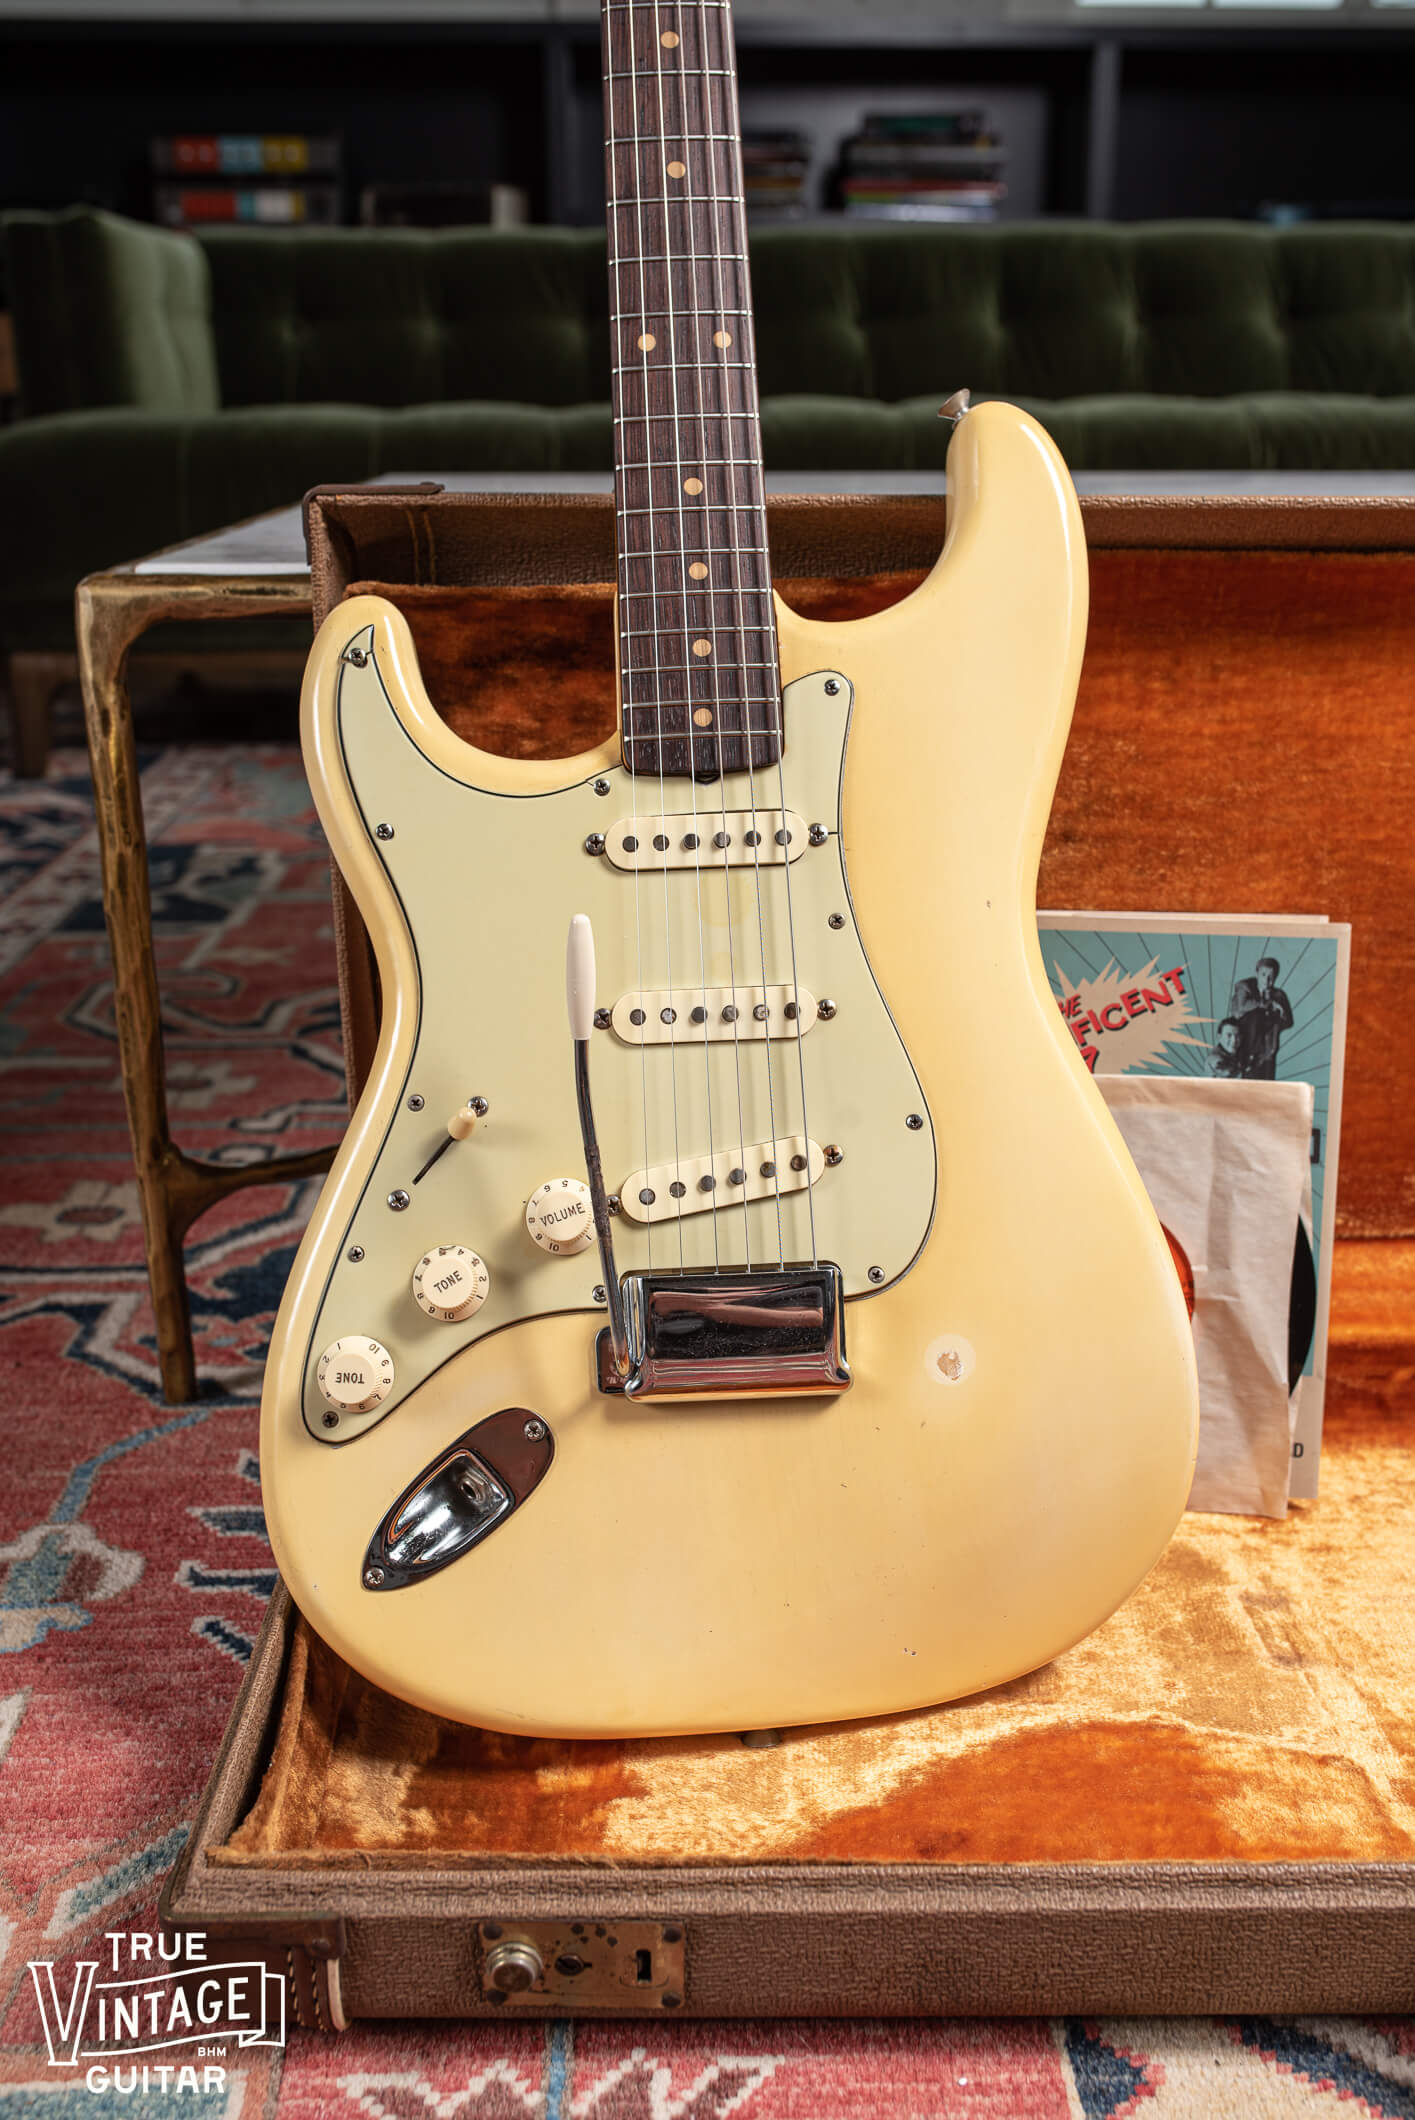 1961 Stratocaster with Blond finish and left hand